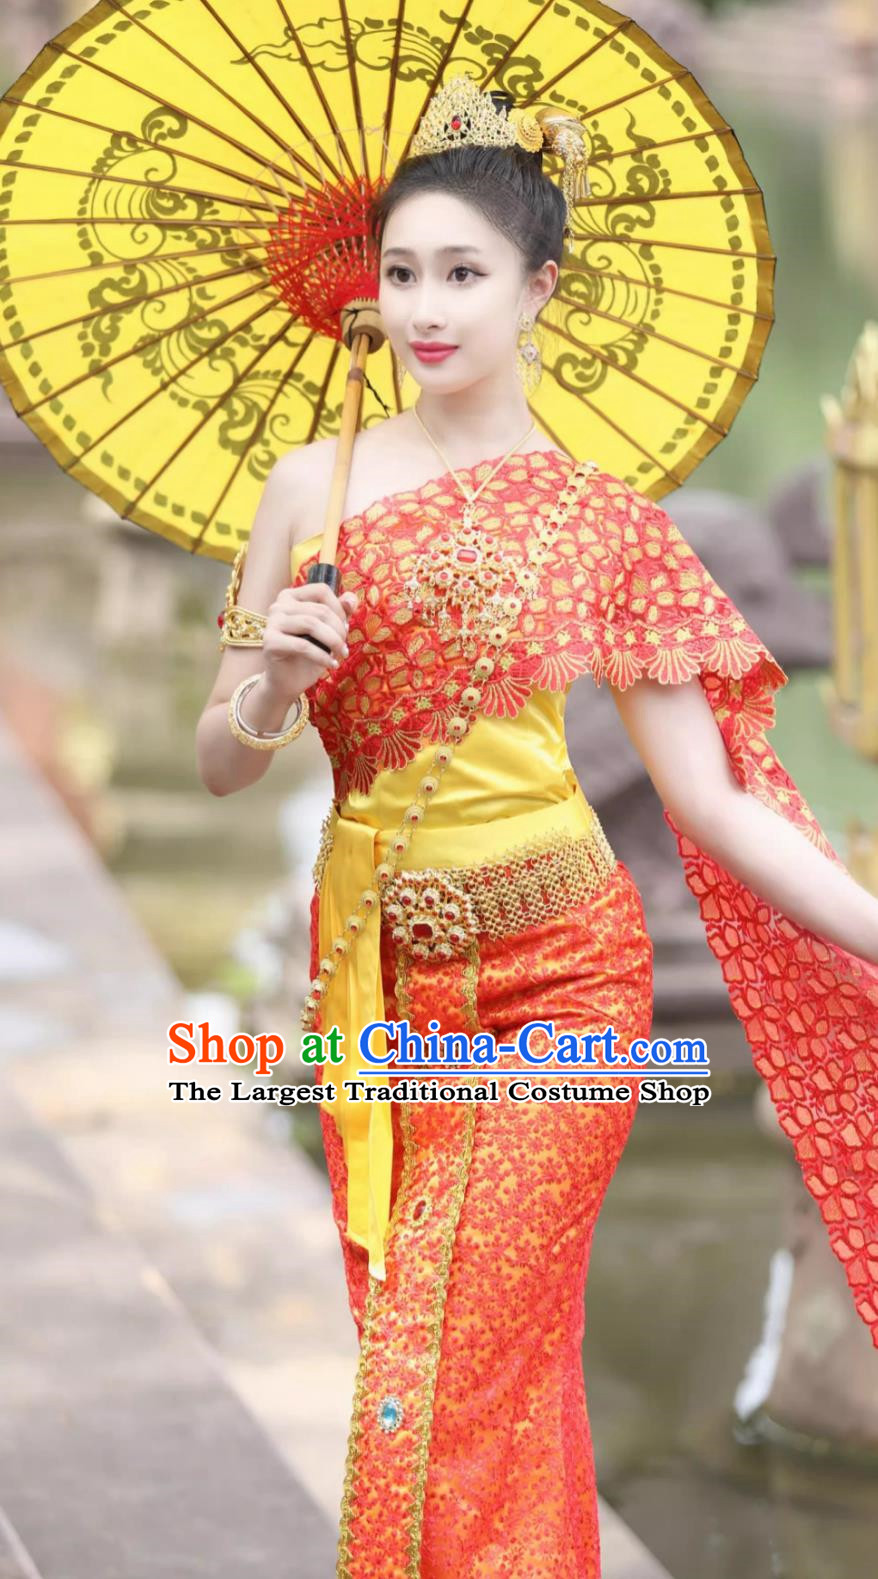 Thailand Traditional Embroidered Costume Bride Red Uniform Thai Clothing Women Set